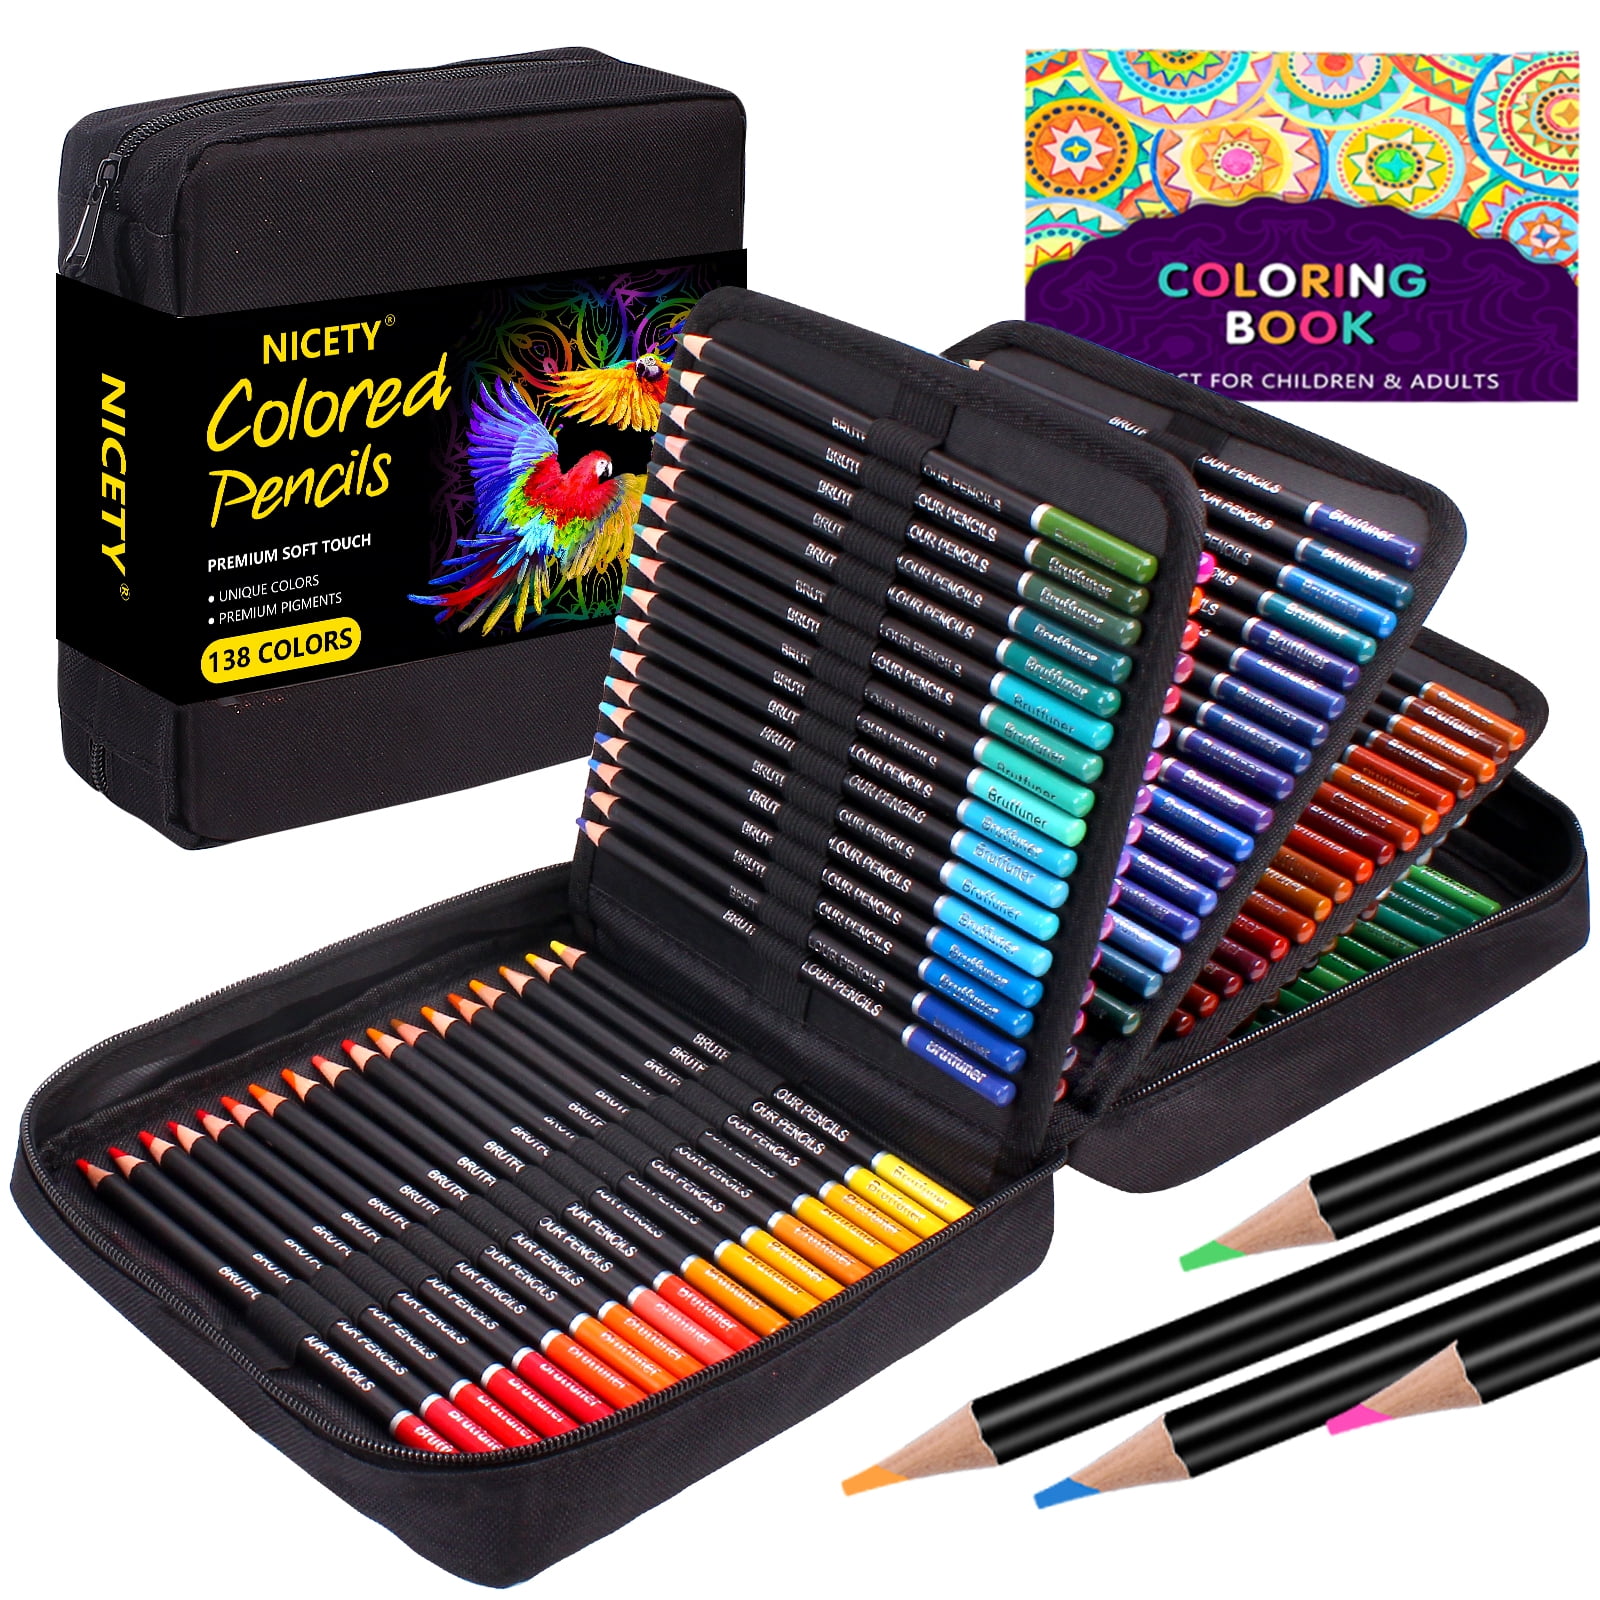 Island Breeze Adult Coloring Book Set With 24 Colored Pencils And Pencil  Sharpener Included: Color Your Way To Calm - Newbourne Media: 9781988137506  - AbeBooks